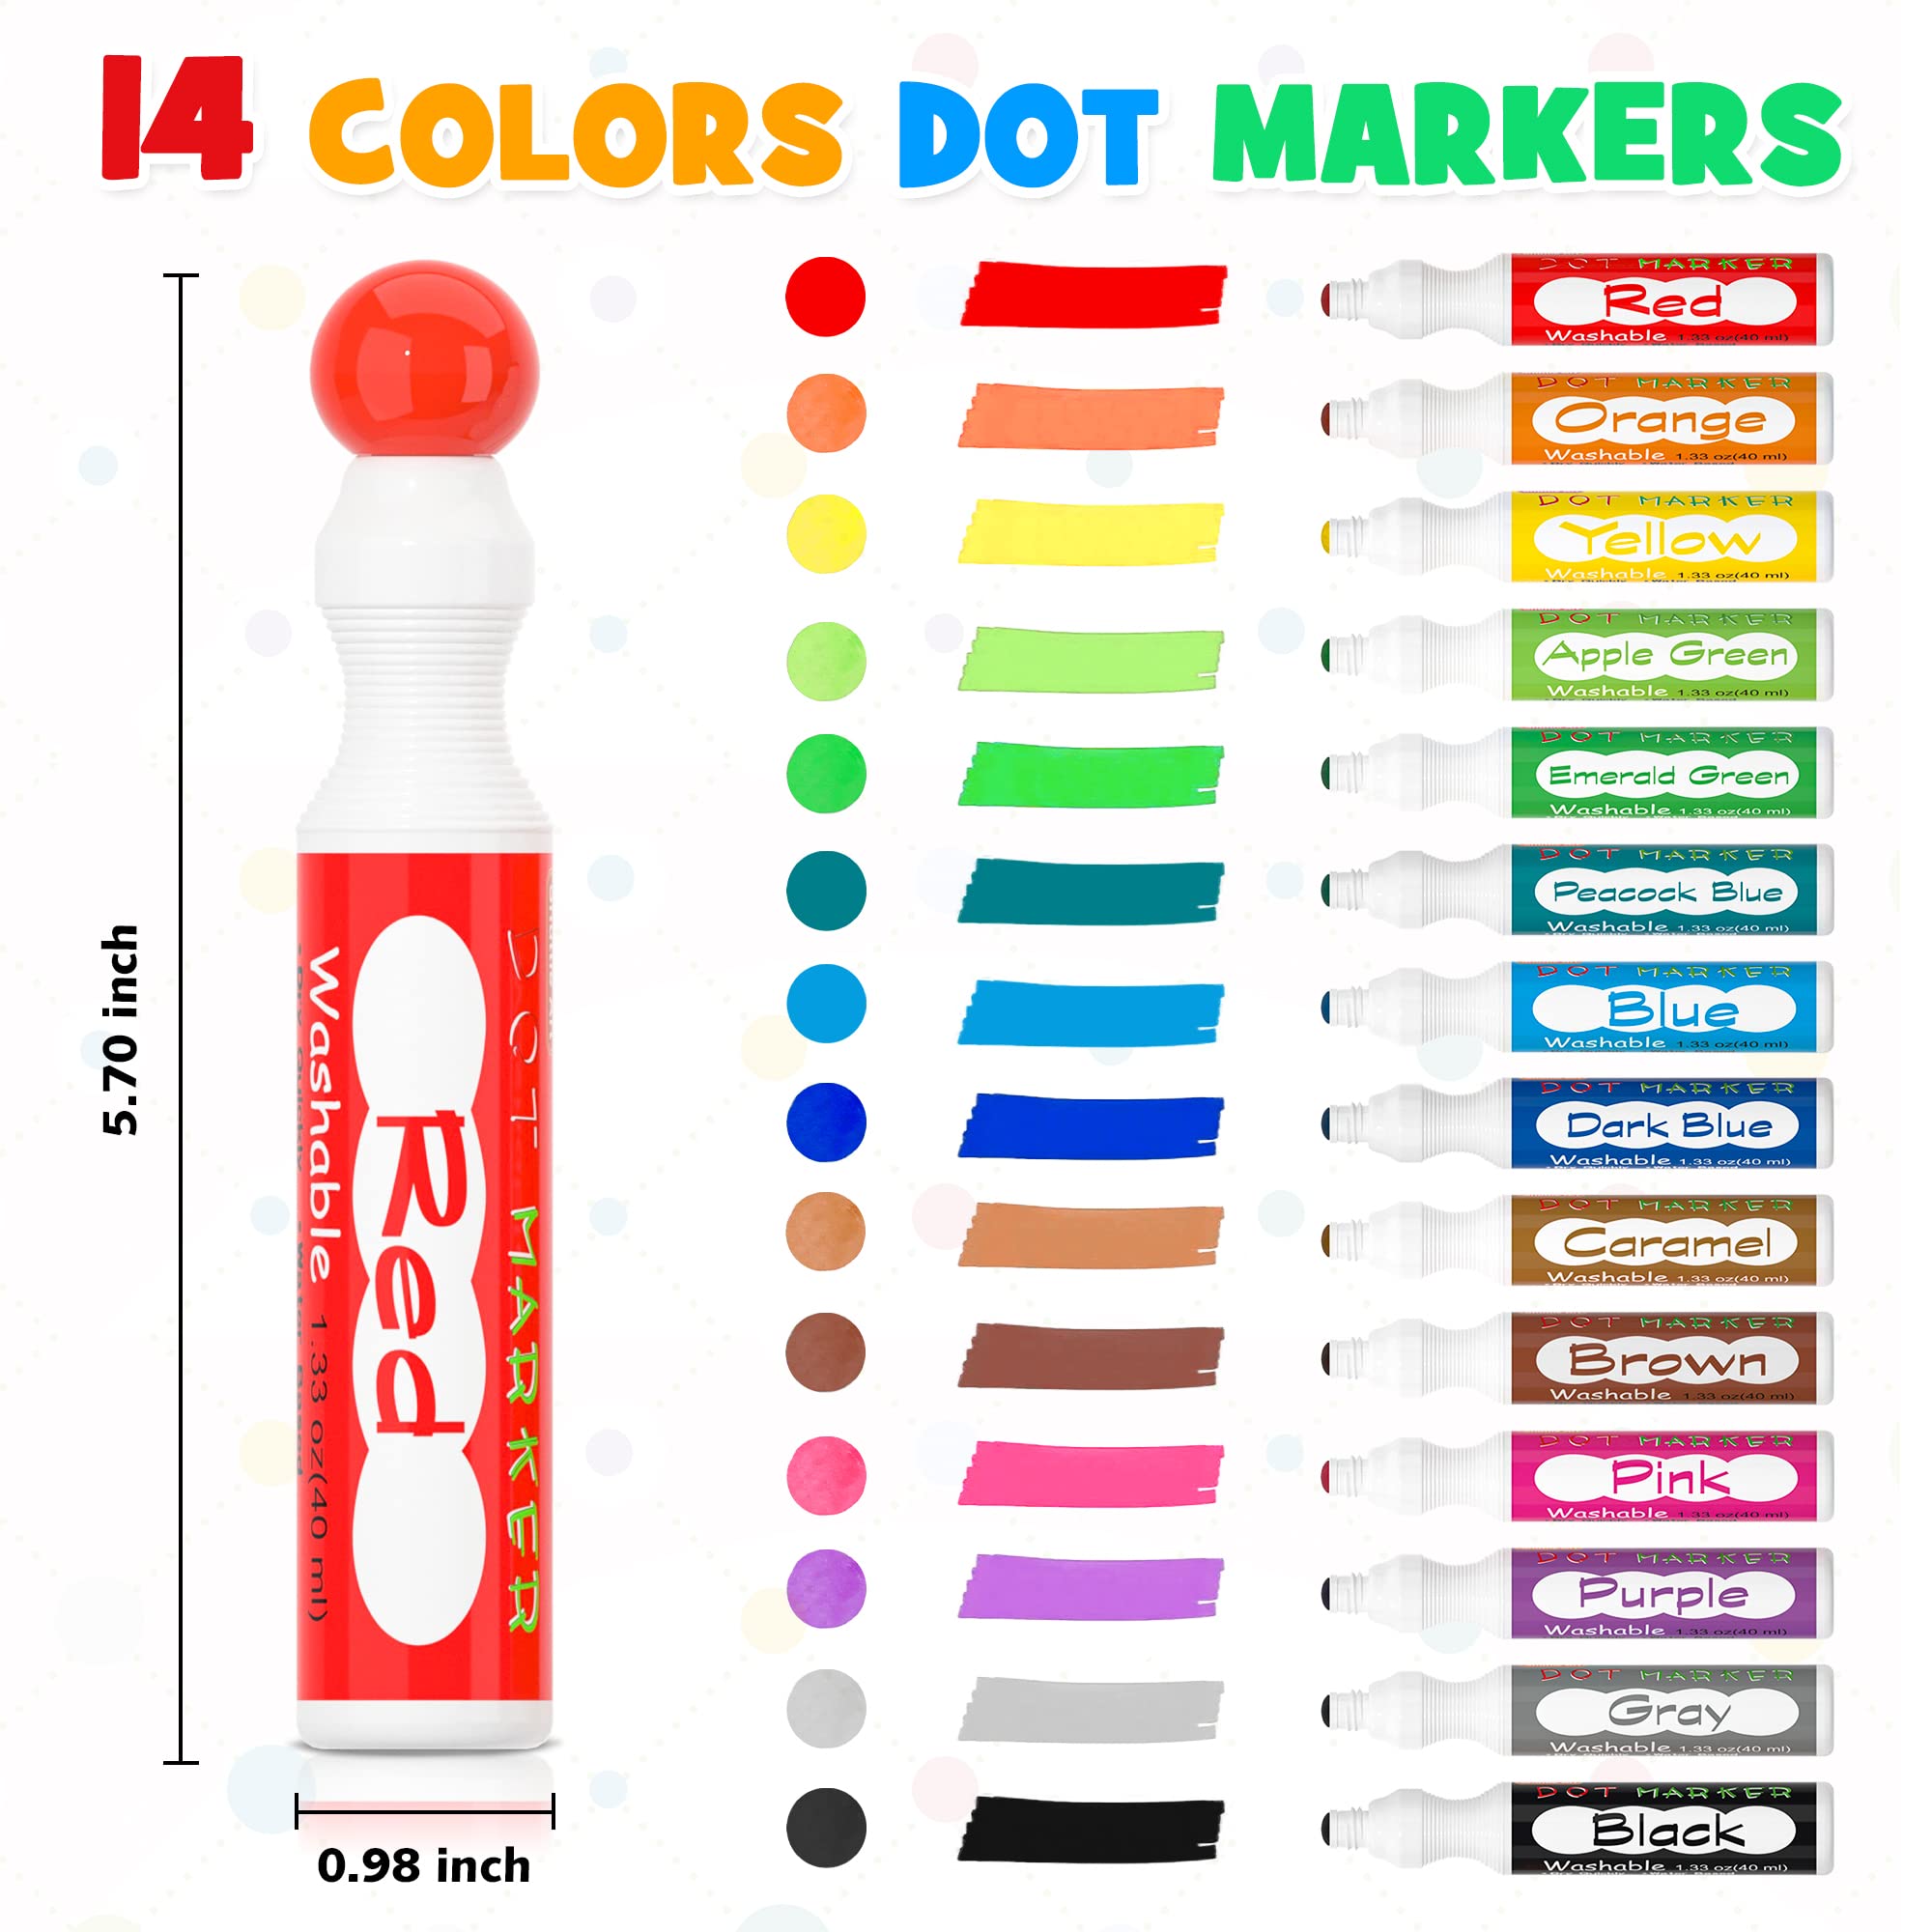 Shuttle Art Dot Markers, 14 Colors Bingo Daubers with 20 Unique Patterns of Dot Book for Toddler Art Activities, Non-Toxic Washable Coloring Markers for Preschool Kids Learning